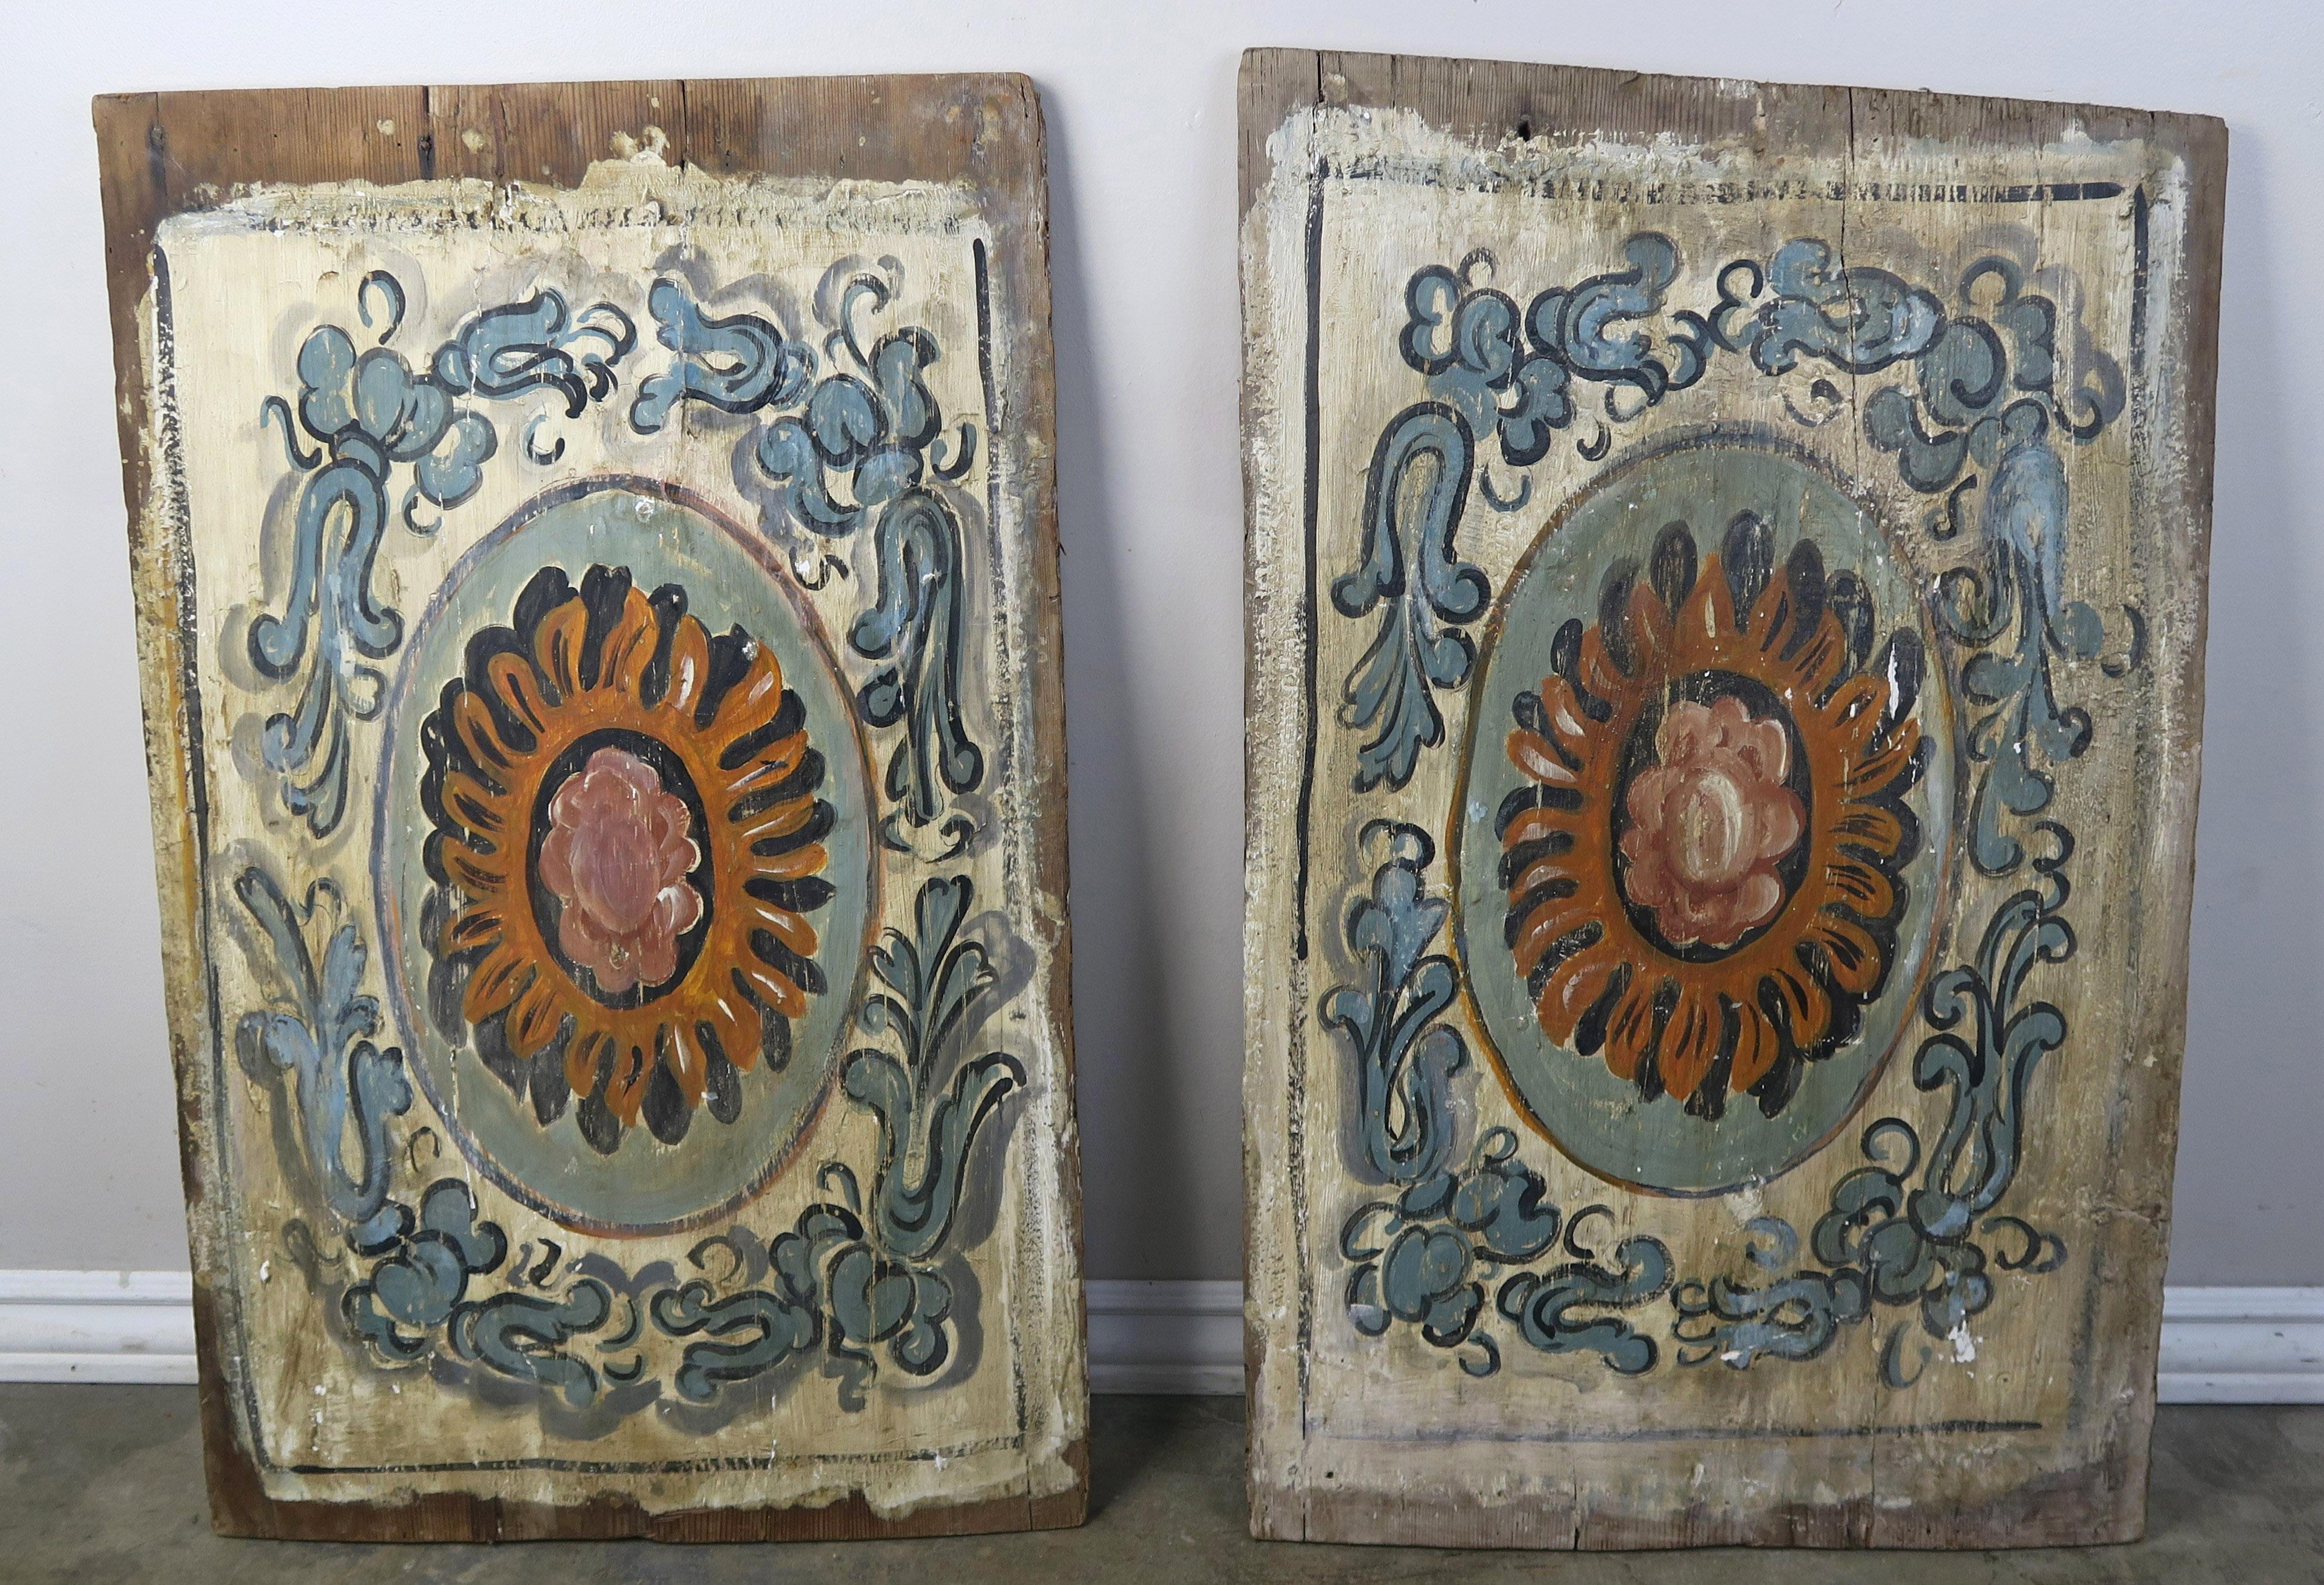 Pair of 19th century painted Italian panels depicting vibrantly colored rosette shaped flowers surrounded by blue painted scrolled and flower designs throughout.